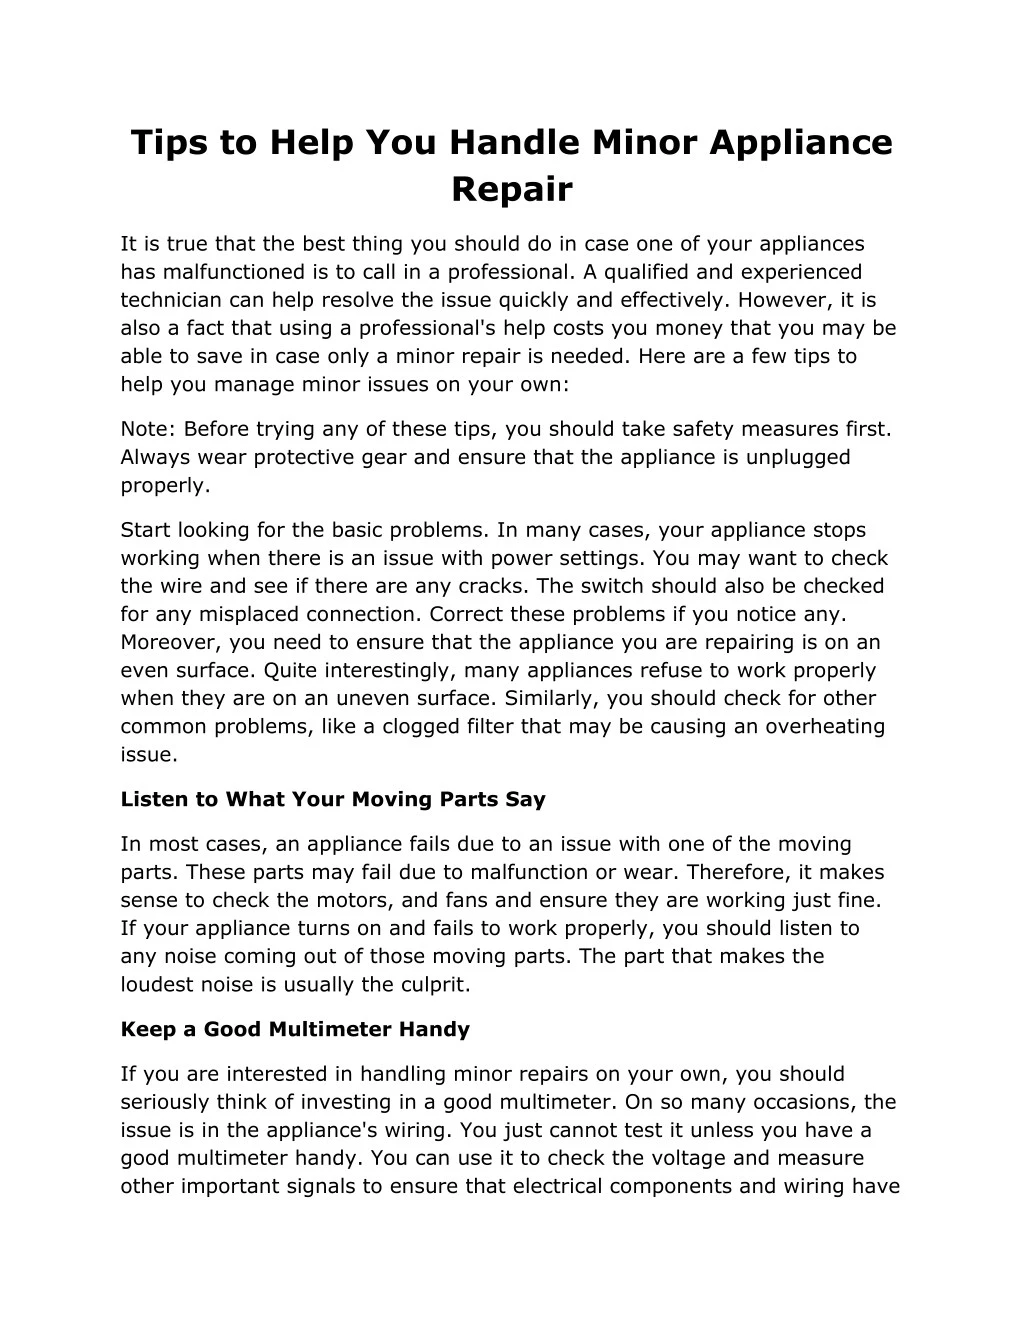 tips to help you handle minor appliance repair